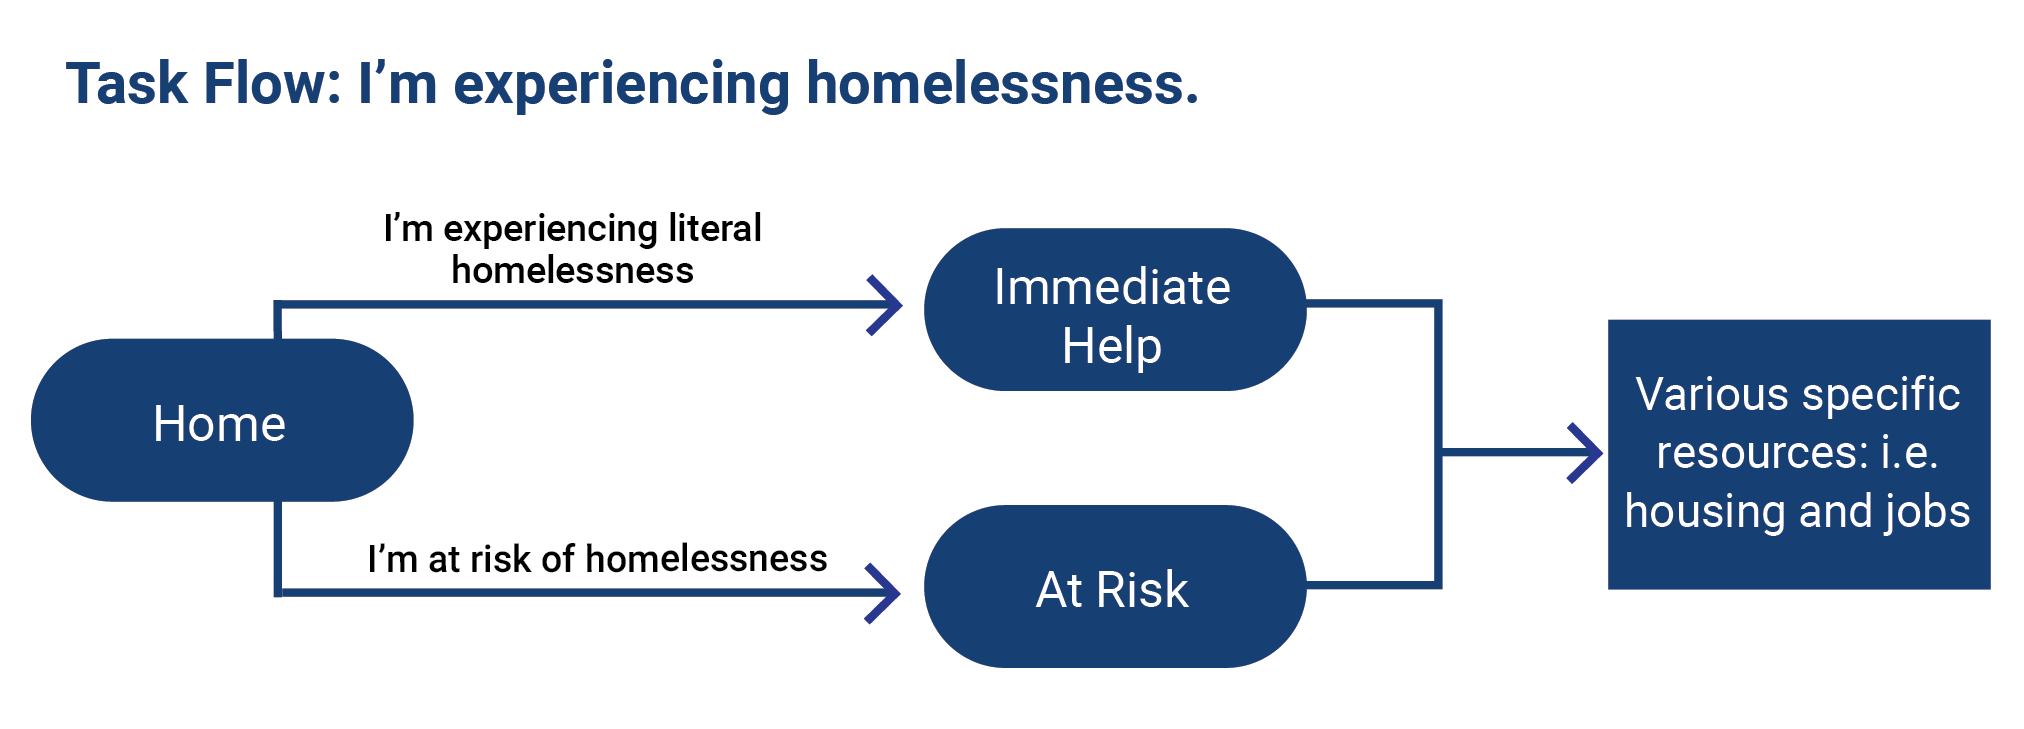 User Task Flow: I'm experiencing homelessness. Shows two ways a person can be experiencing homelessness and a roadmap to resources they can access.